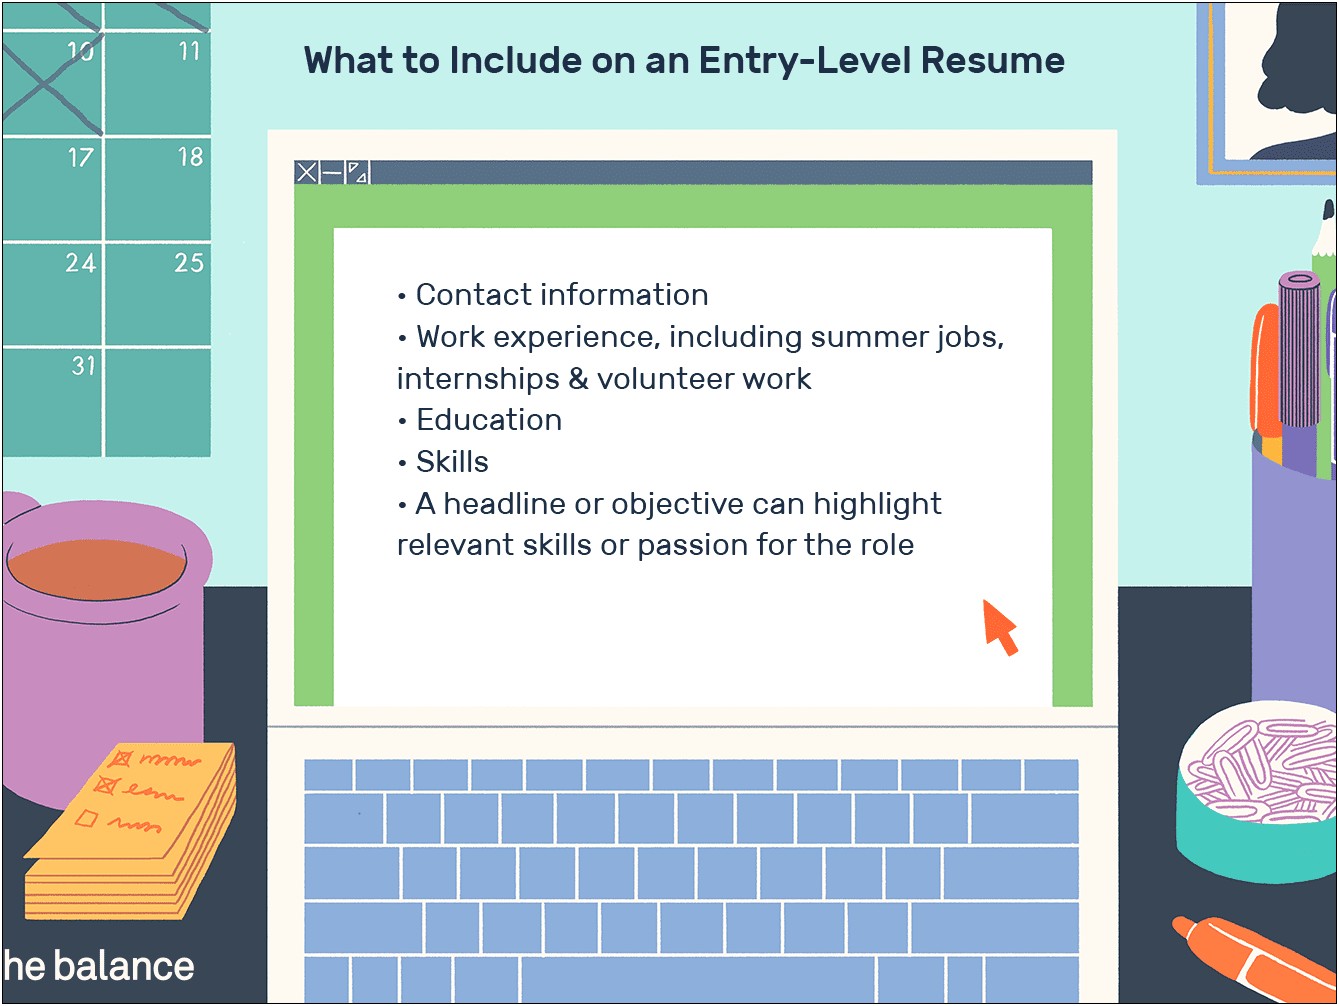 Should Entry Level Resumes Include Objective